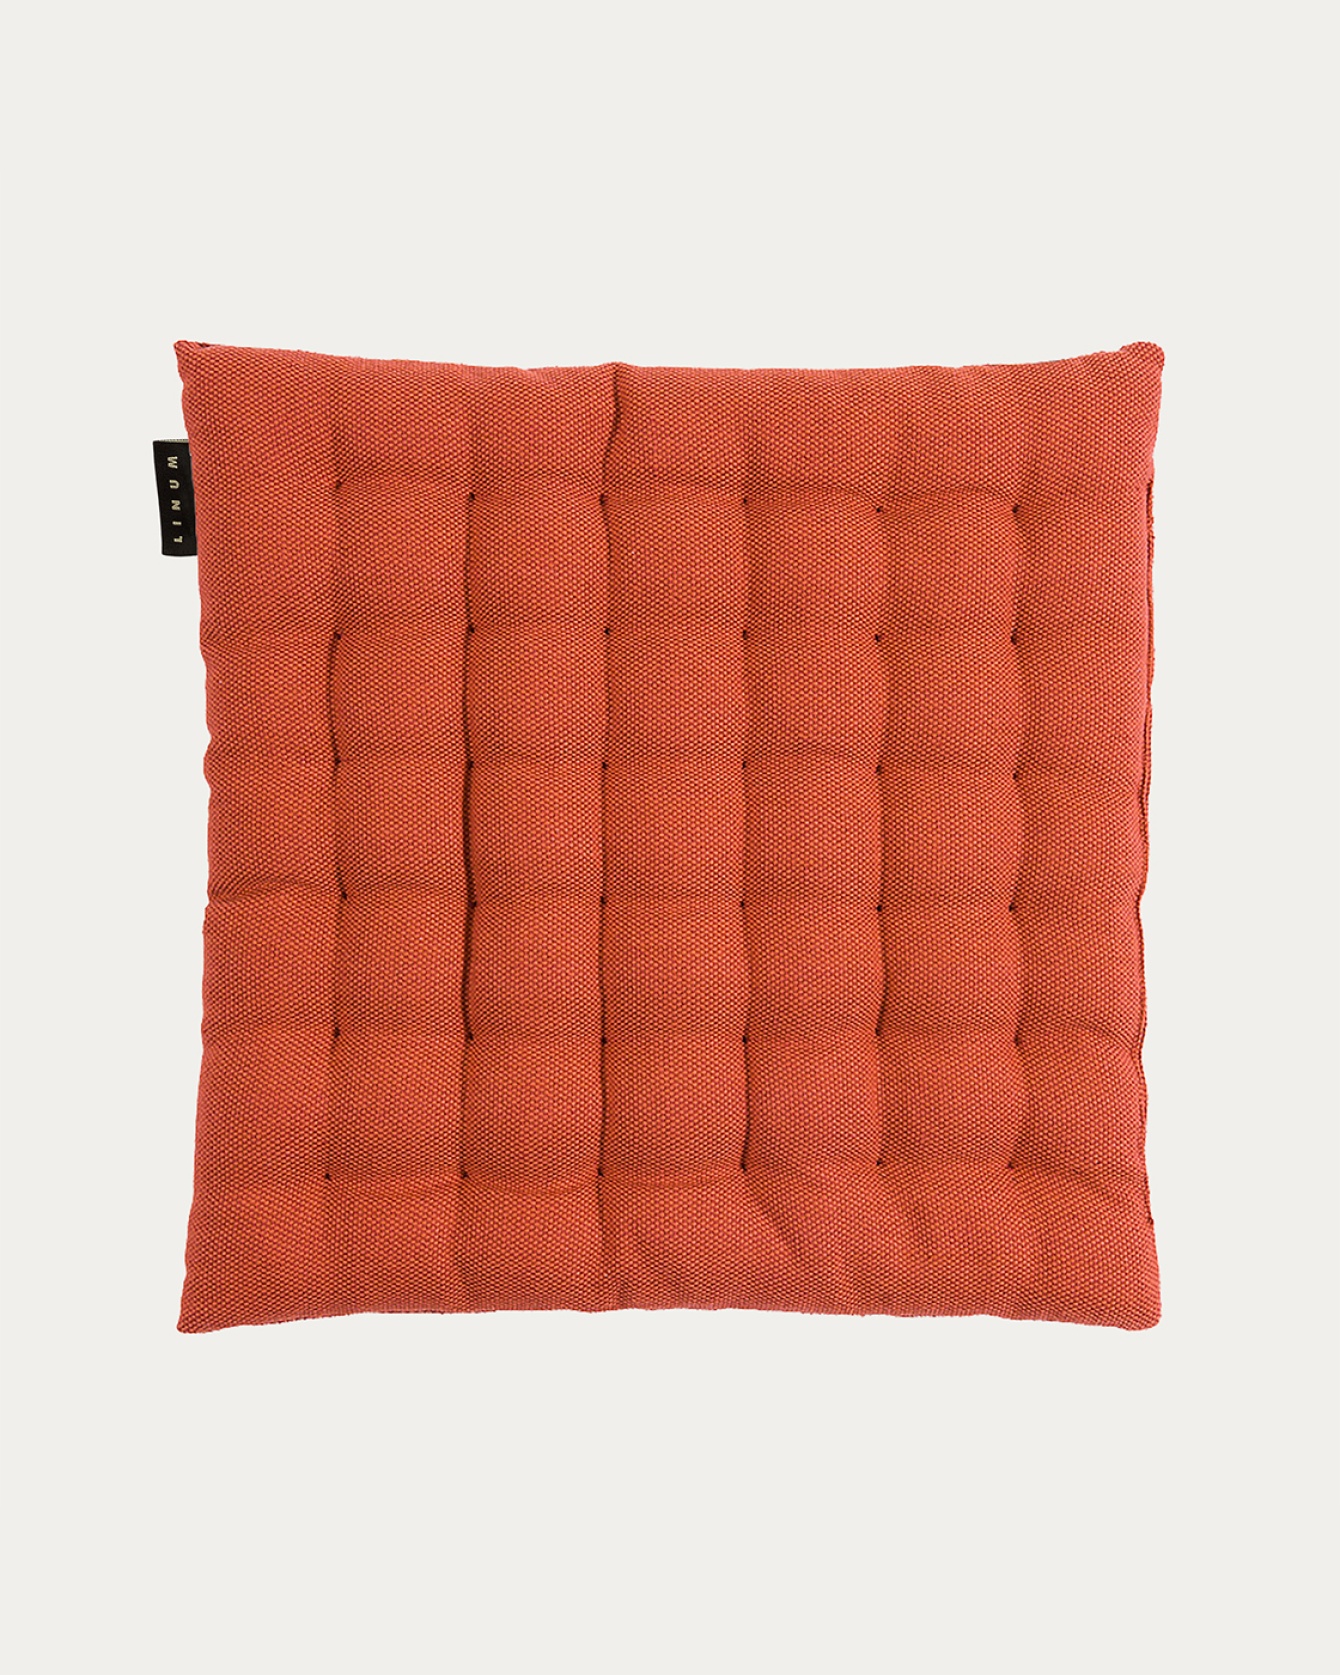 Product image rusty orange PEPPER seat cushion made of soft cotton with recycled polyester filling from LINUM DESIGN. Size 40x40 cm.